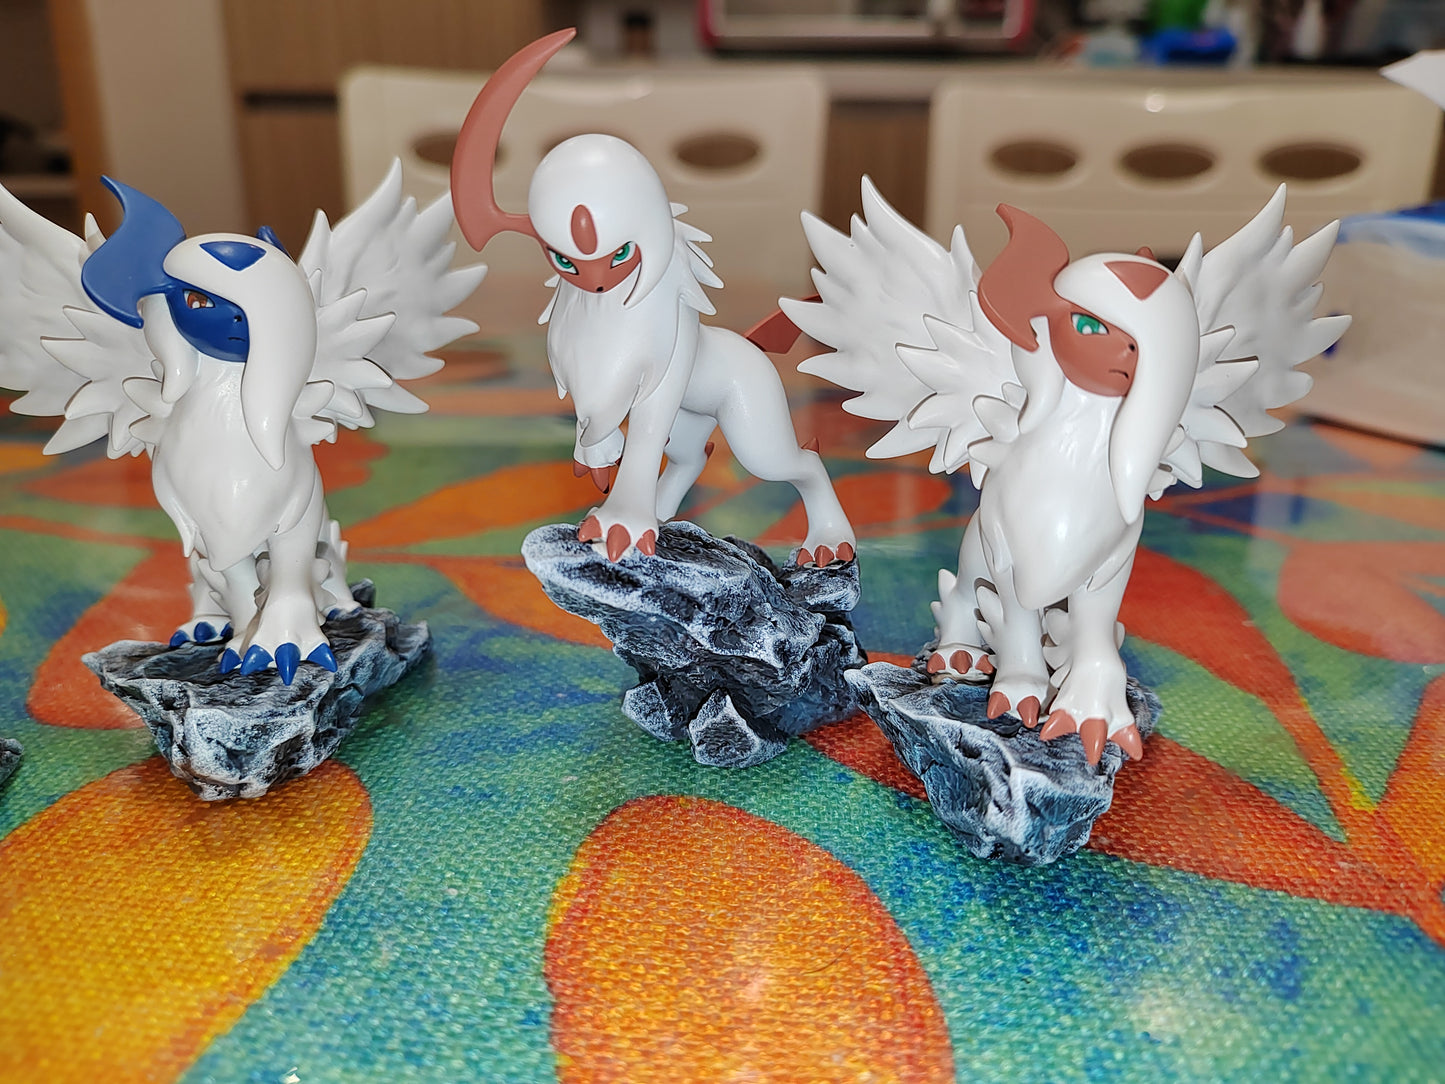 〖Sold Out〗Pokemon Scale World Absol Mega Absol #359 1:20 - Pallet Town Studio